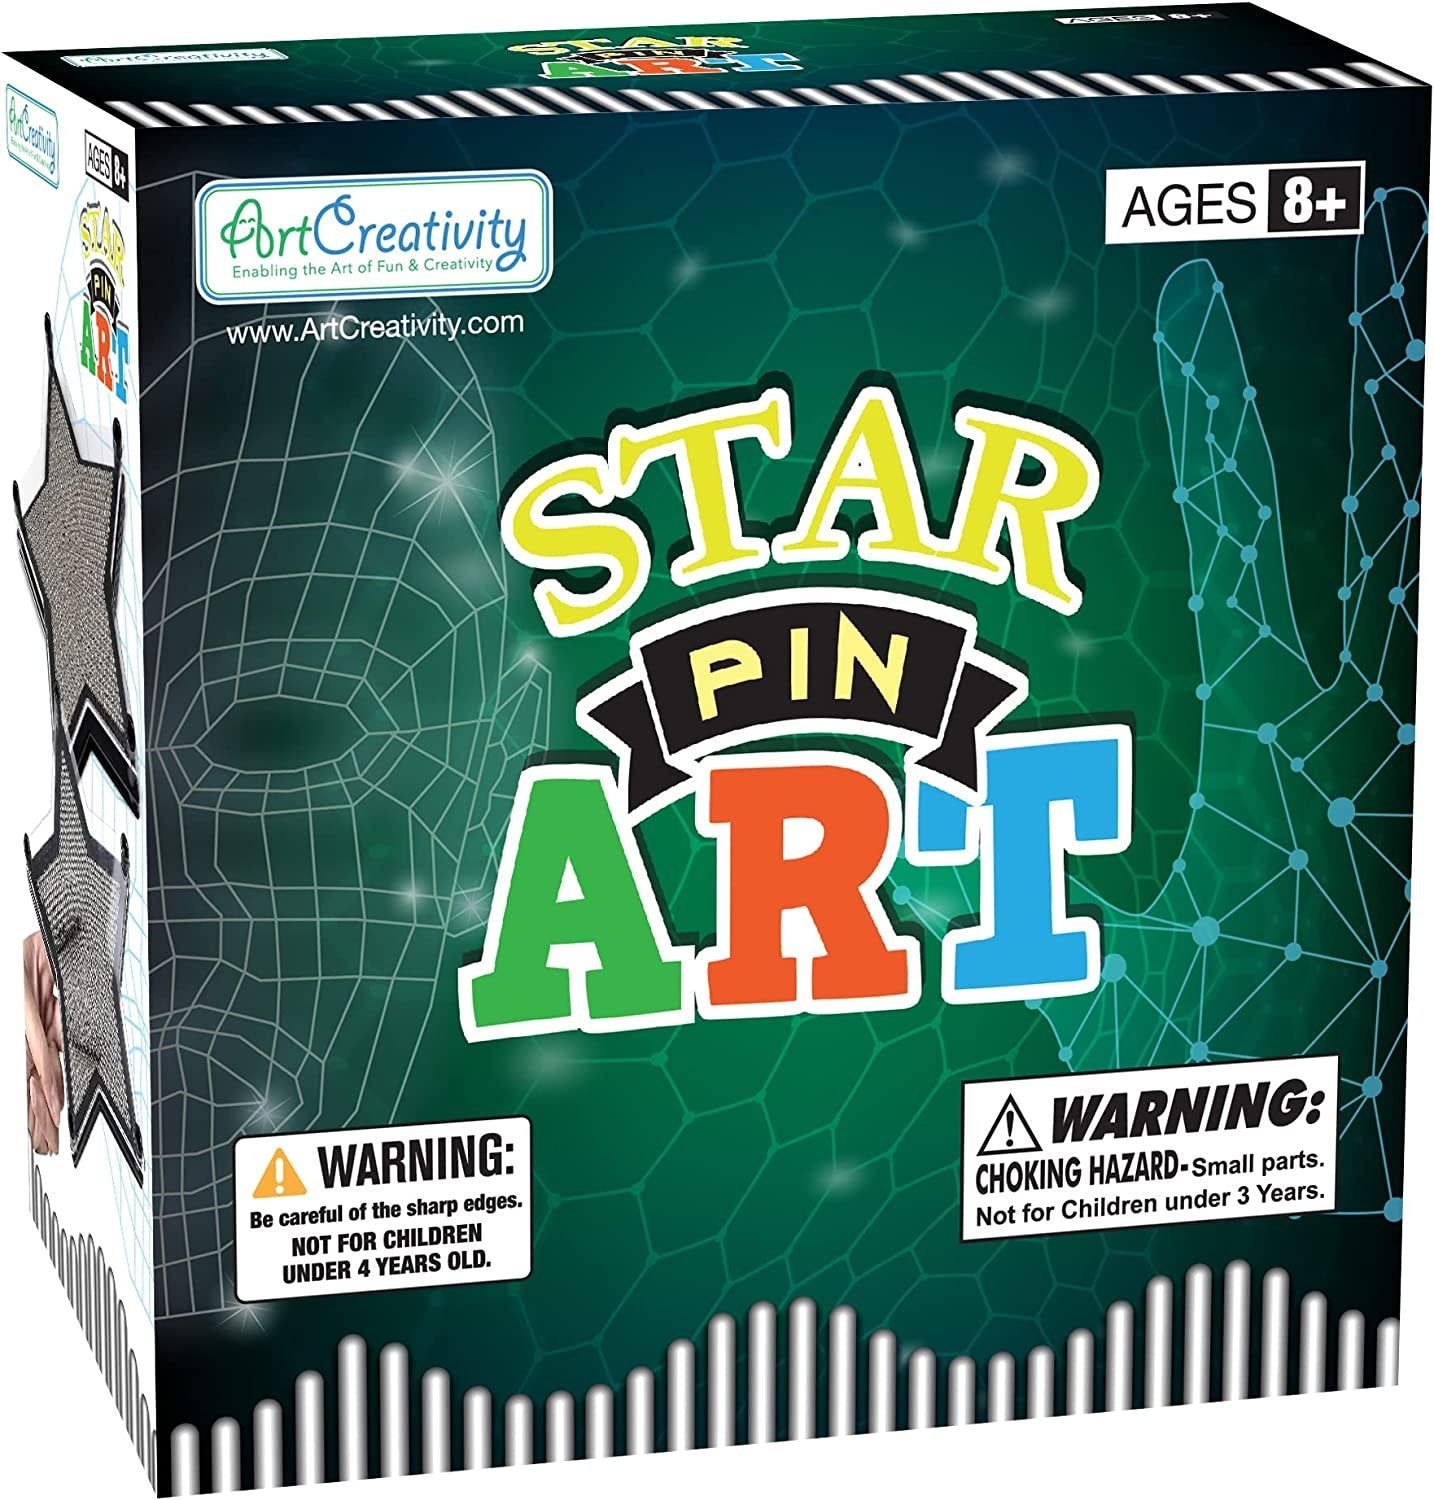 6" Star Pin Art Game for Kids-Adults Pin Art Toy for Autistic Kids-Stainless Steel Metal Pins, Sturdy Plastic Frame-Great Party Favor, Gift for Boys-Girls, Office Desk Decoration